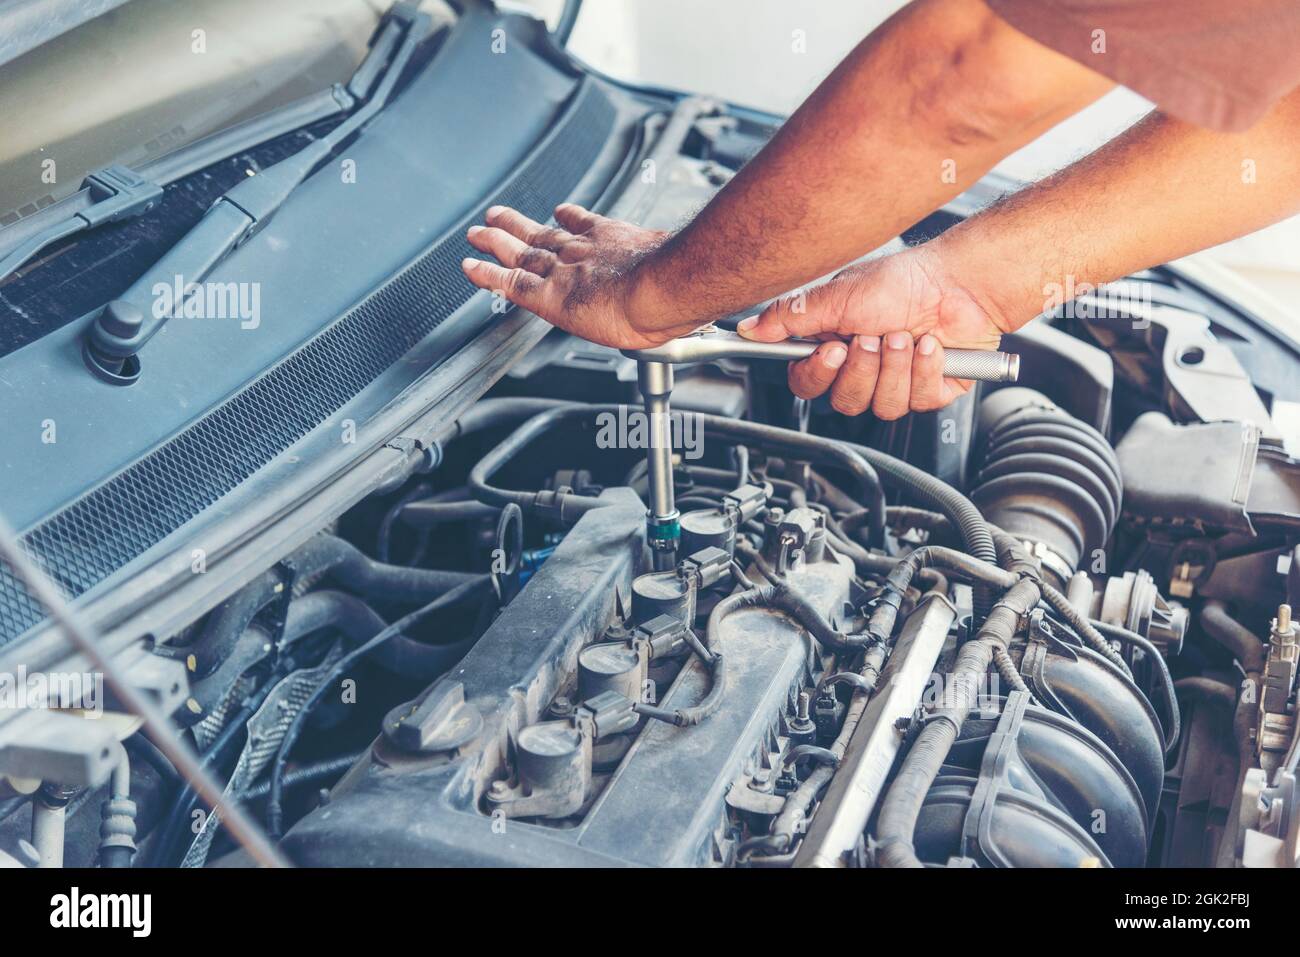 Mechanic Car Service in automobile garage auto car and vehicles service mechanical engineering. Automobile mechanic hands car repairs automotive techn Stock Photo